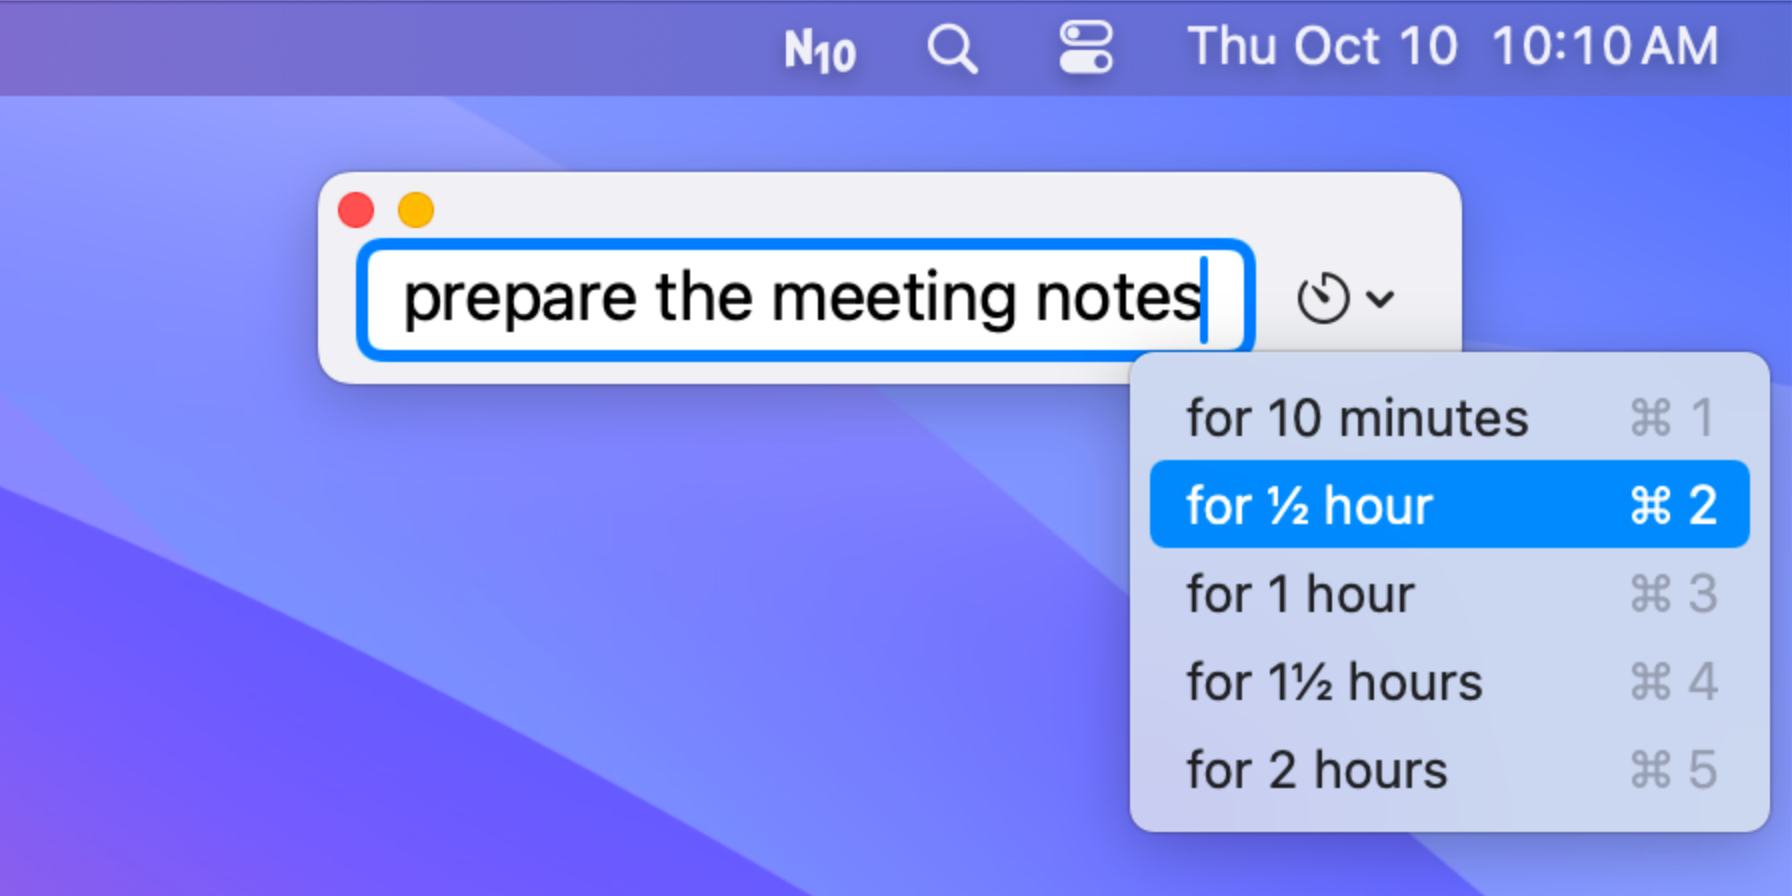 Screenshot showing the N10 new session window in a crop of the top-right corner of a Mac desktop. The text box reads "prepare the meeting notes". The session timer menu is open, showing the five options: "for 10 minutes," "for ½ hour," "for 1 hour," "for 1½ hours," and "for 2 hours."